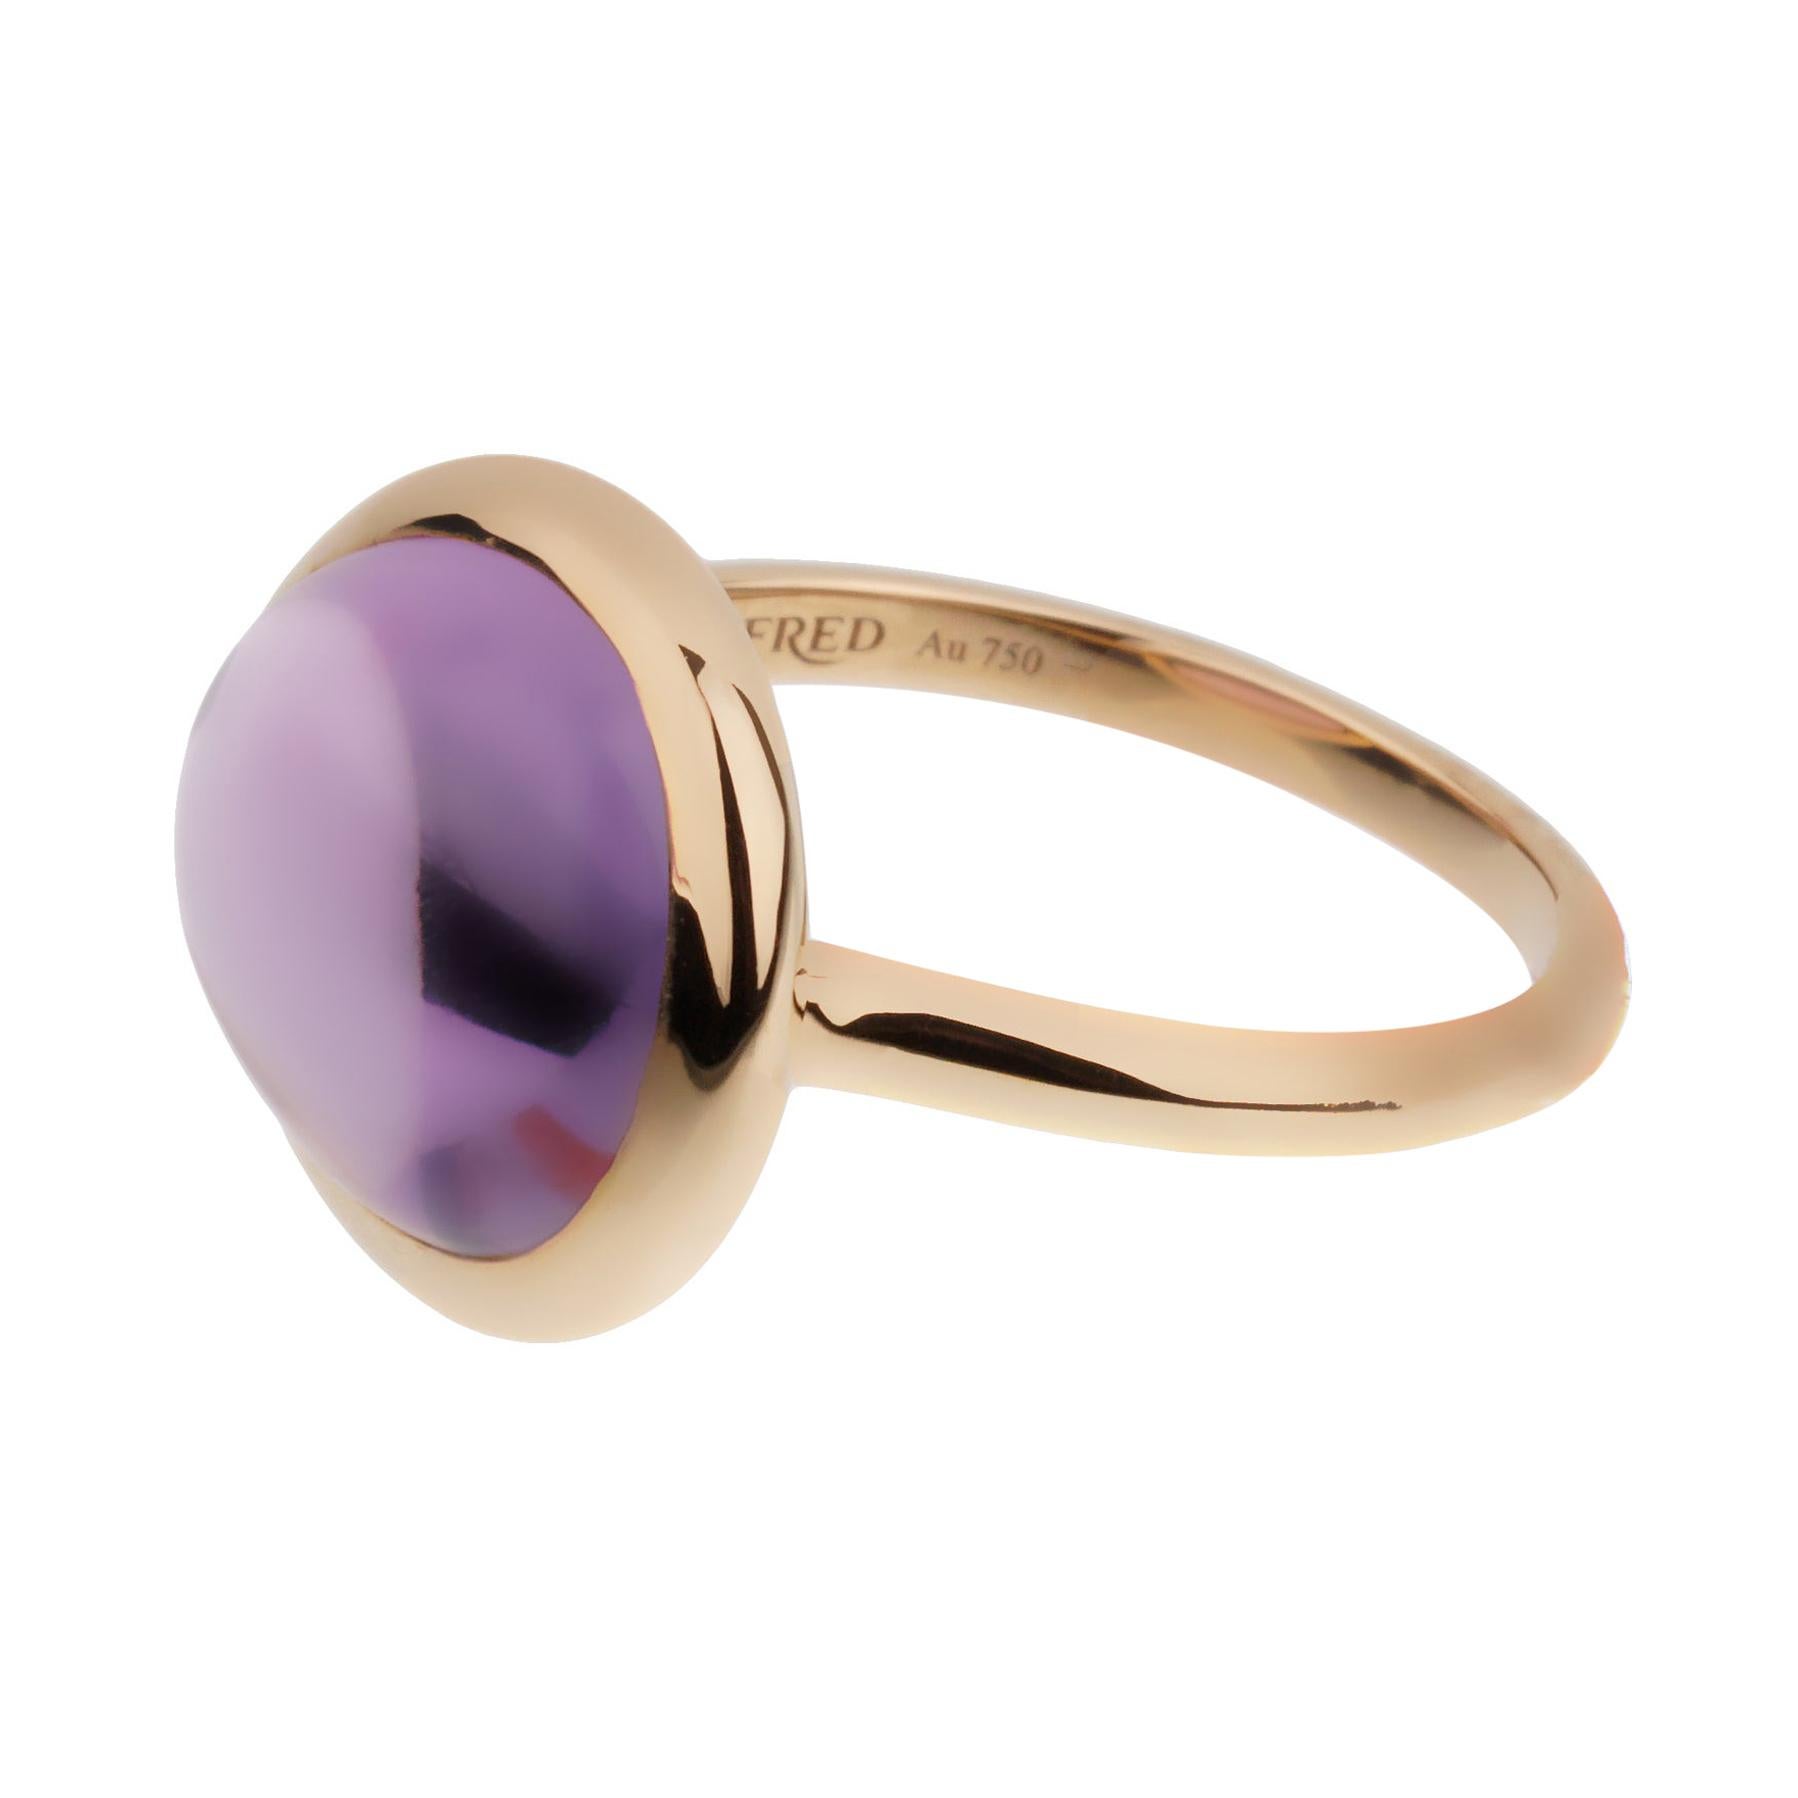 A chic Fred of Paris rose gold cocktail ring showcasing a 7ct cabochon Amethyst set in 18k gold. The ring measures a size 5 3/4 and can be resized if needed.